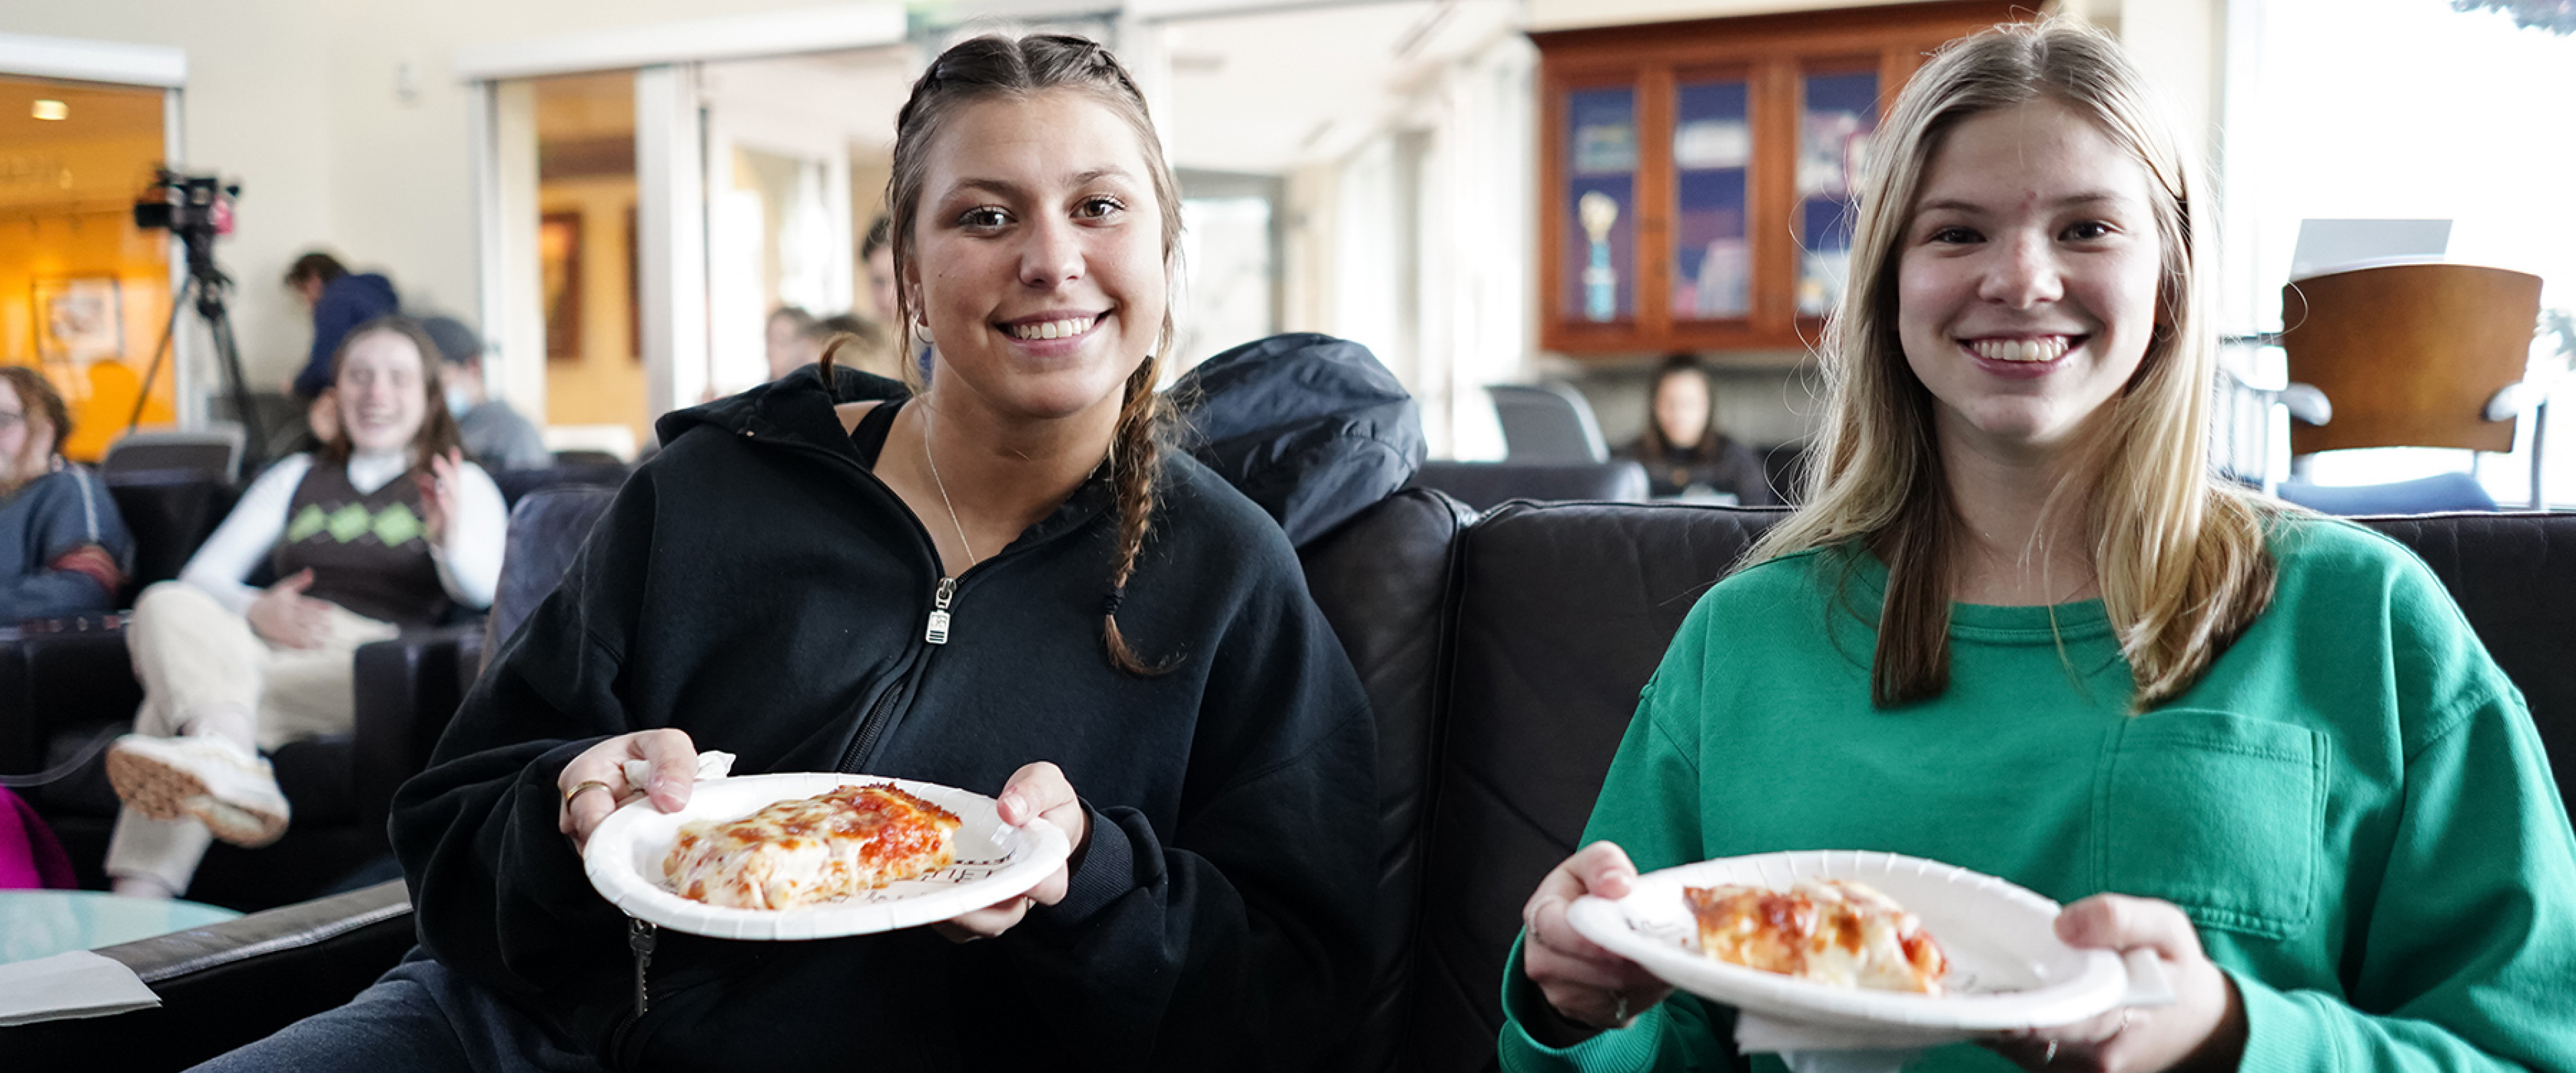 Students enjoying pizza in the lounge.